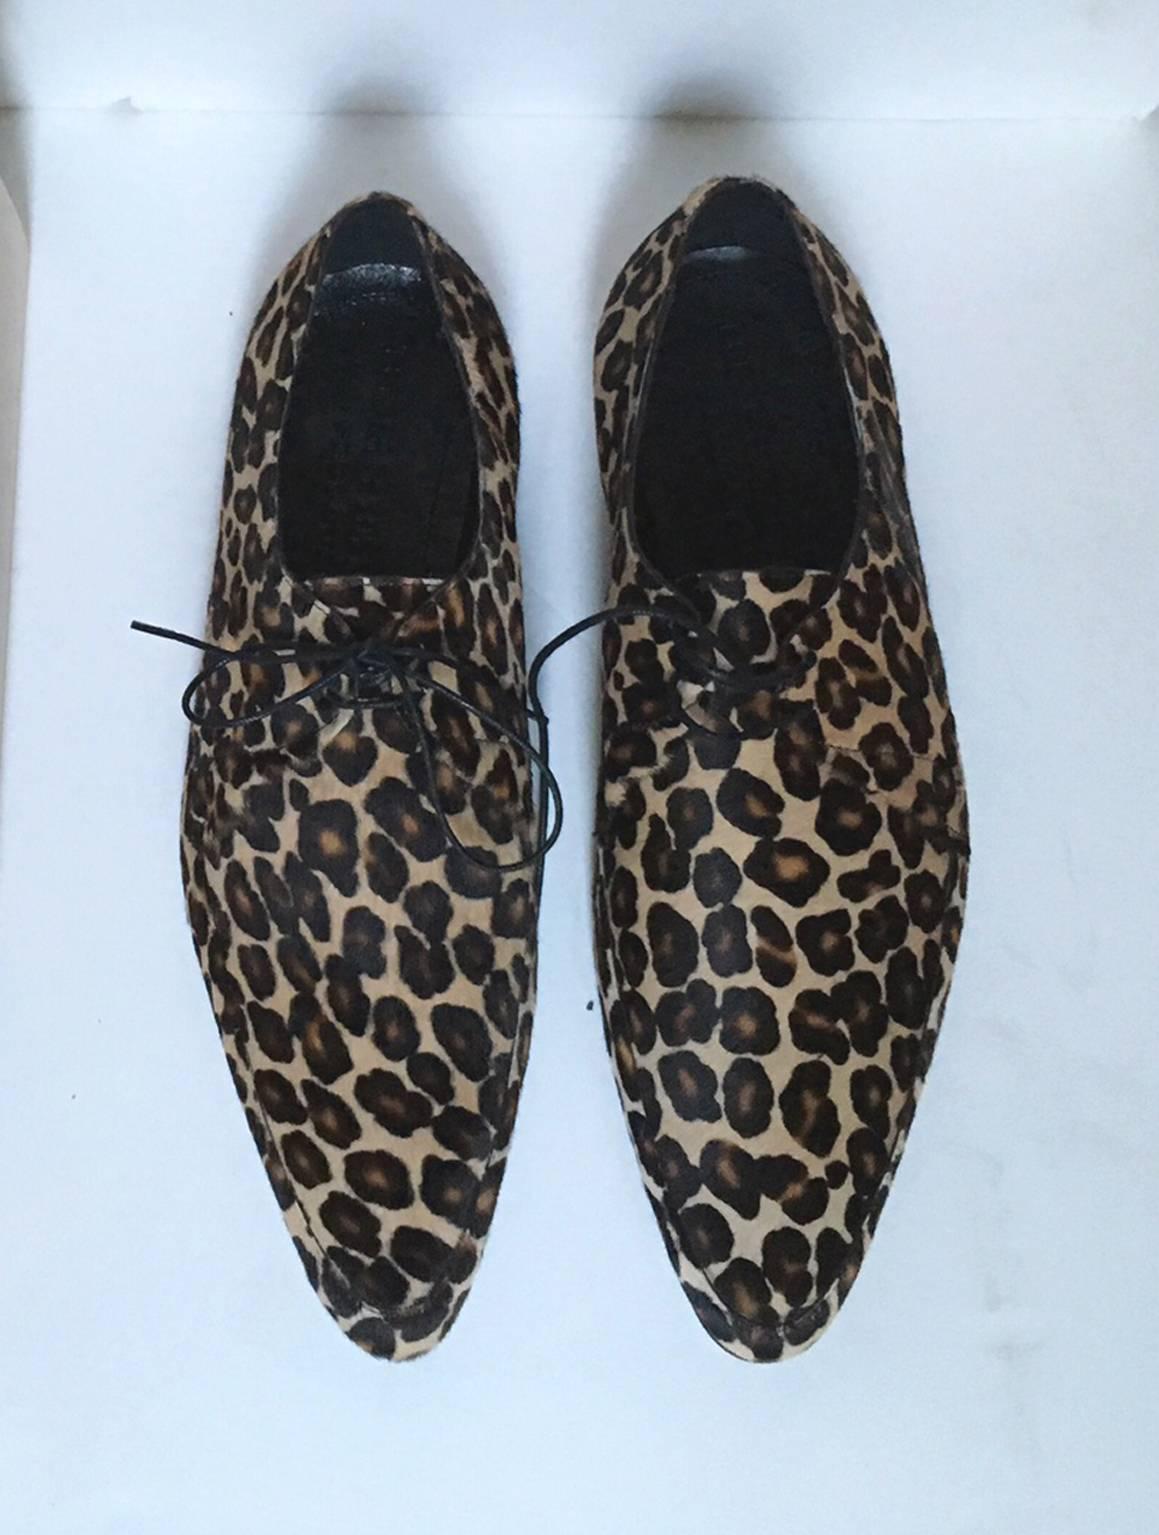 Burberry Prorsum Men's Leopard Print Calf Hair Derby Shoes new with box, unused 1